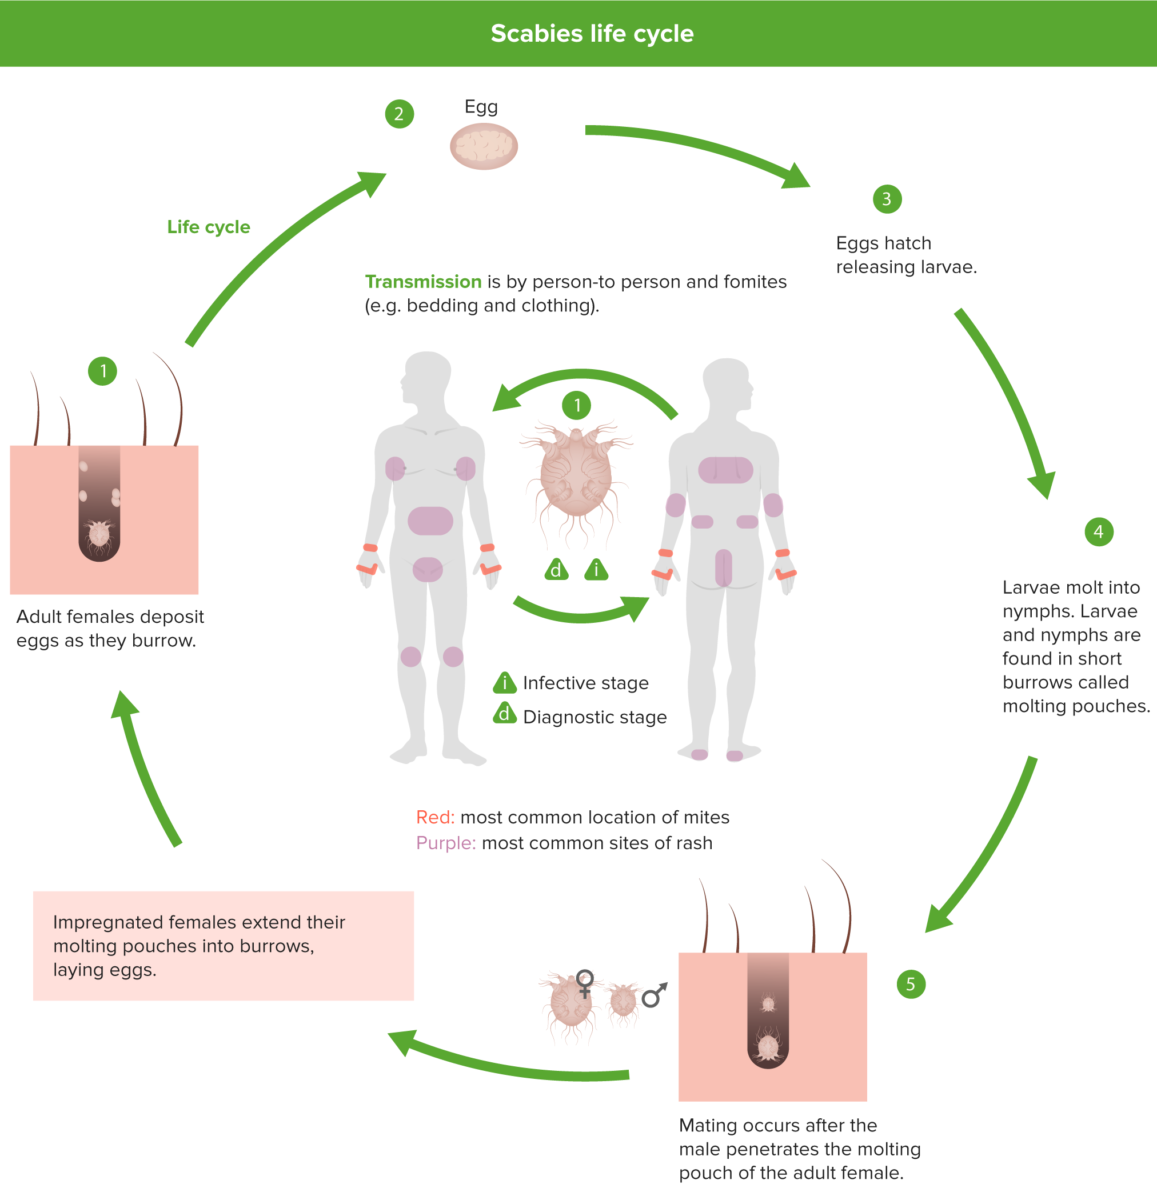 Scabies life cycle